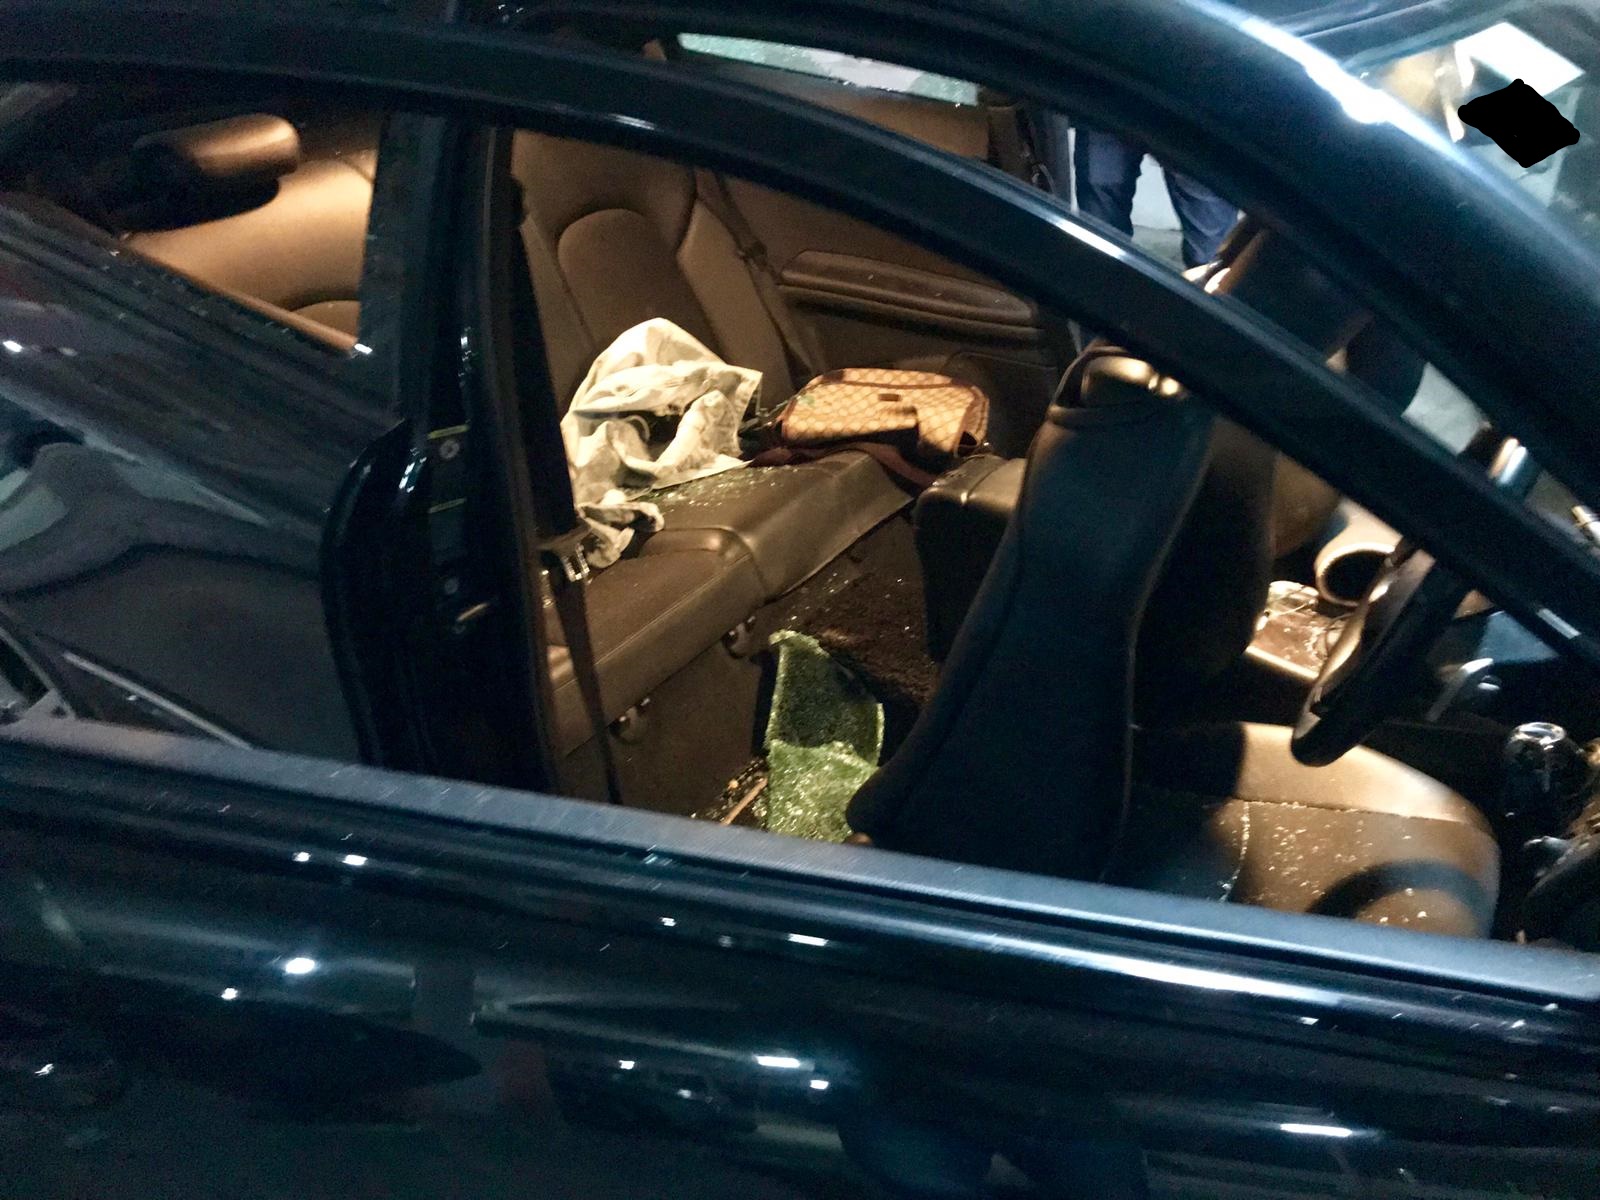 Drugs found in car in CNB's operation on 6 Nov 2019